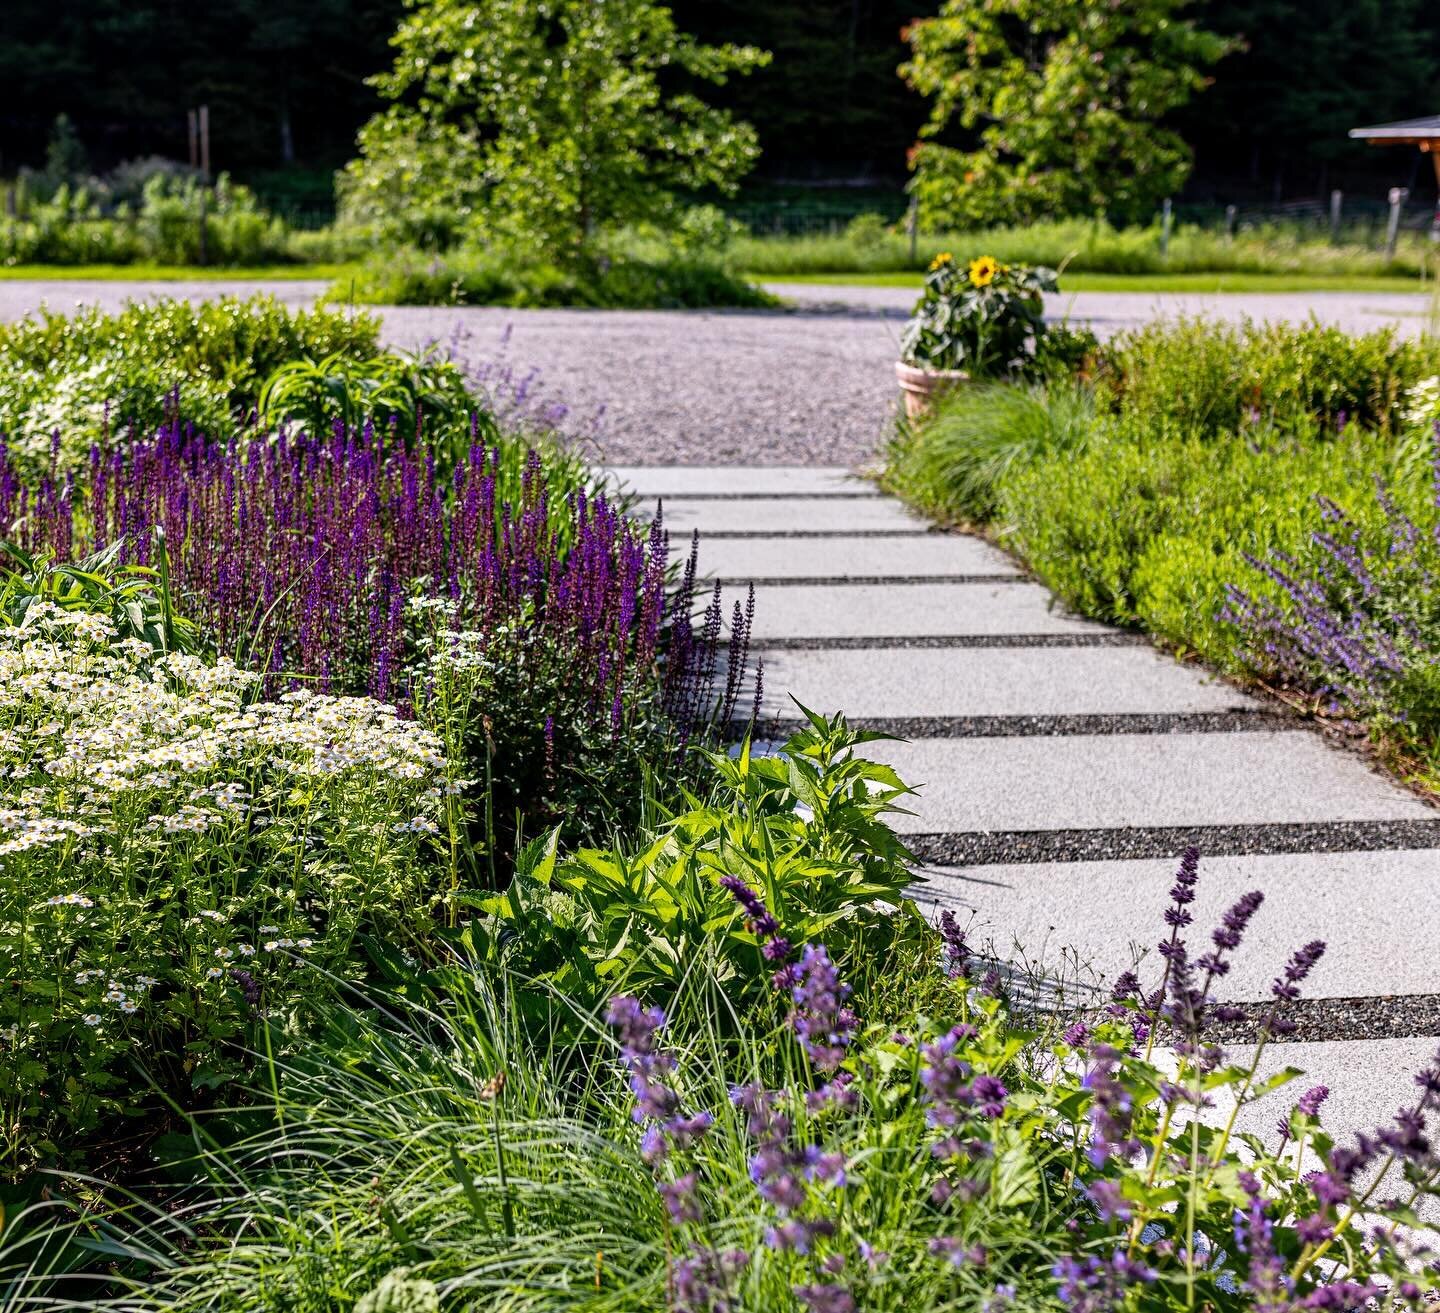 Thankful and honored to receive an honor award from the @vnla.vt for Beaver Meadow Garden. 

Designed and installed four years ago, this garden has been a testing ground for new planting combinations, an opportunity to push the limits of soil fertili